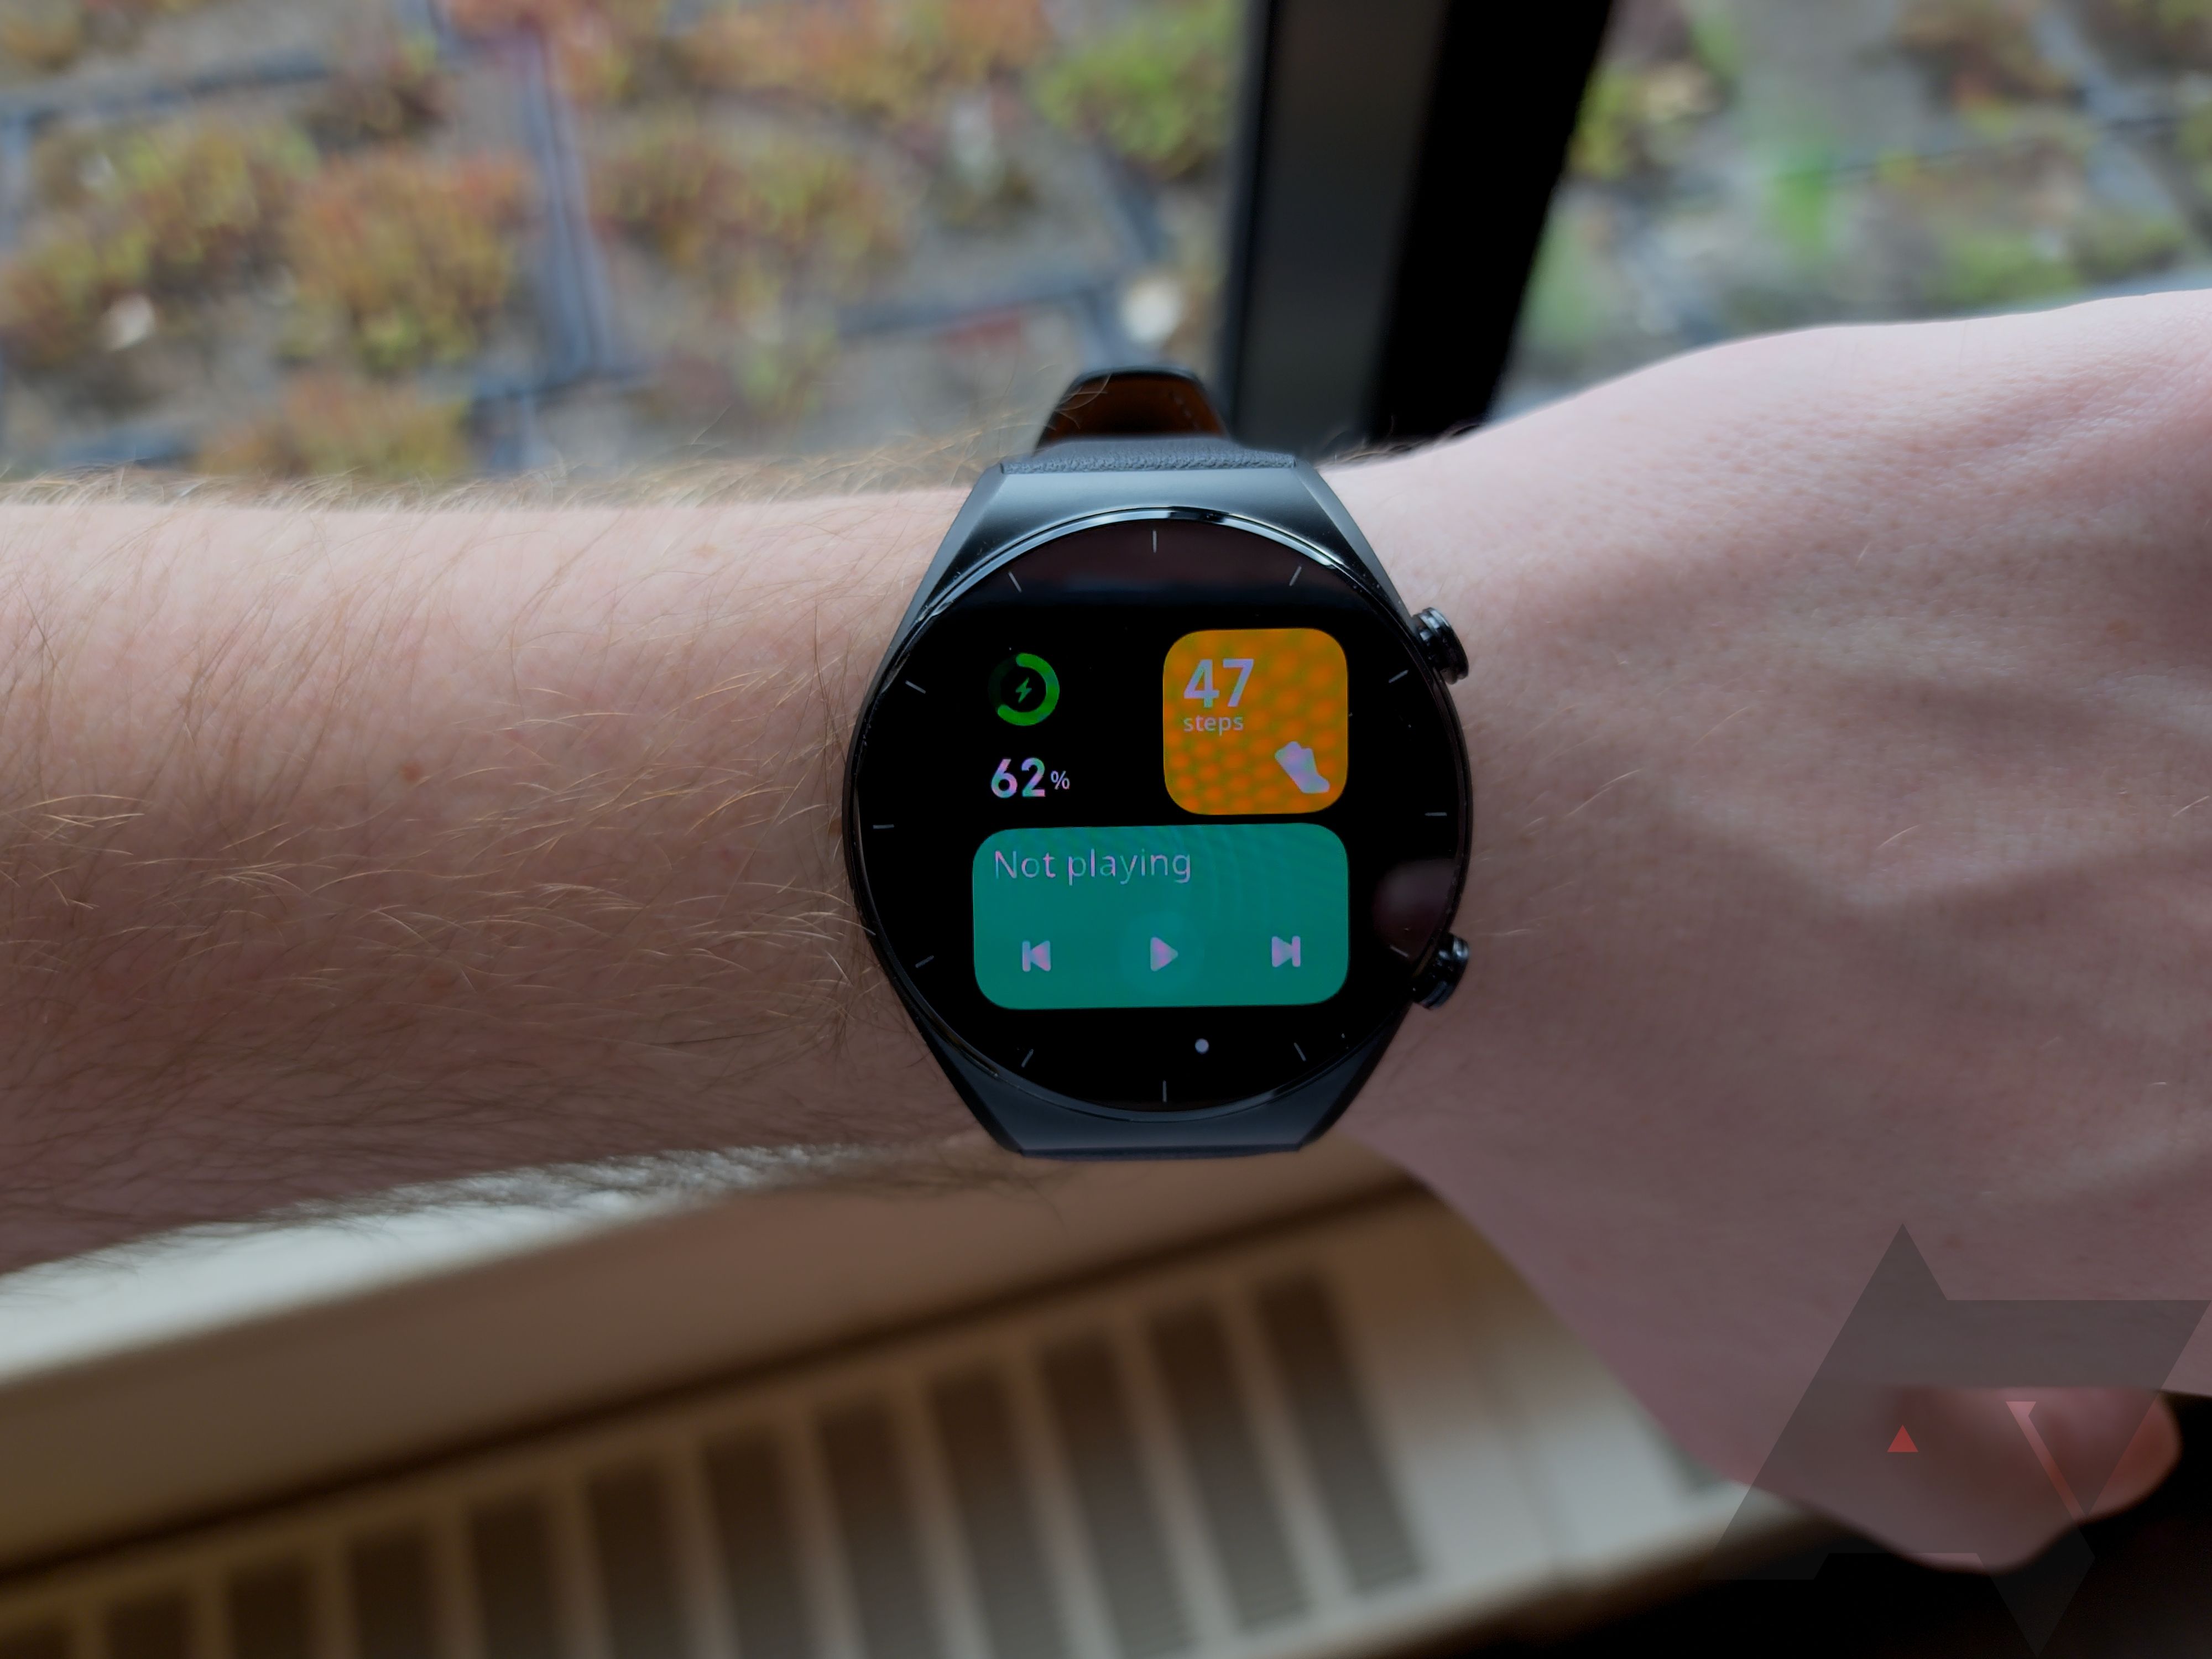 Xiaomi Watch S1 smartwatch review: Allrounder with shortcomings